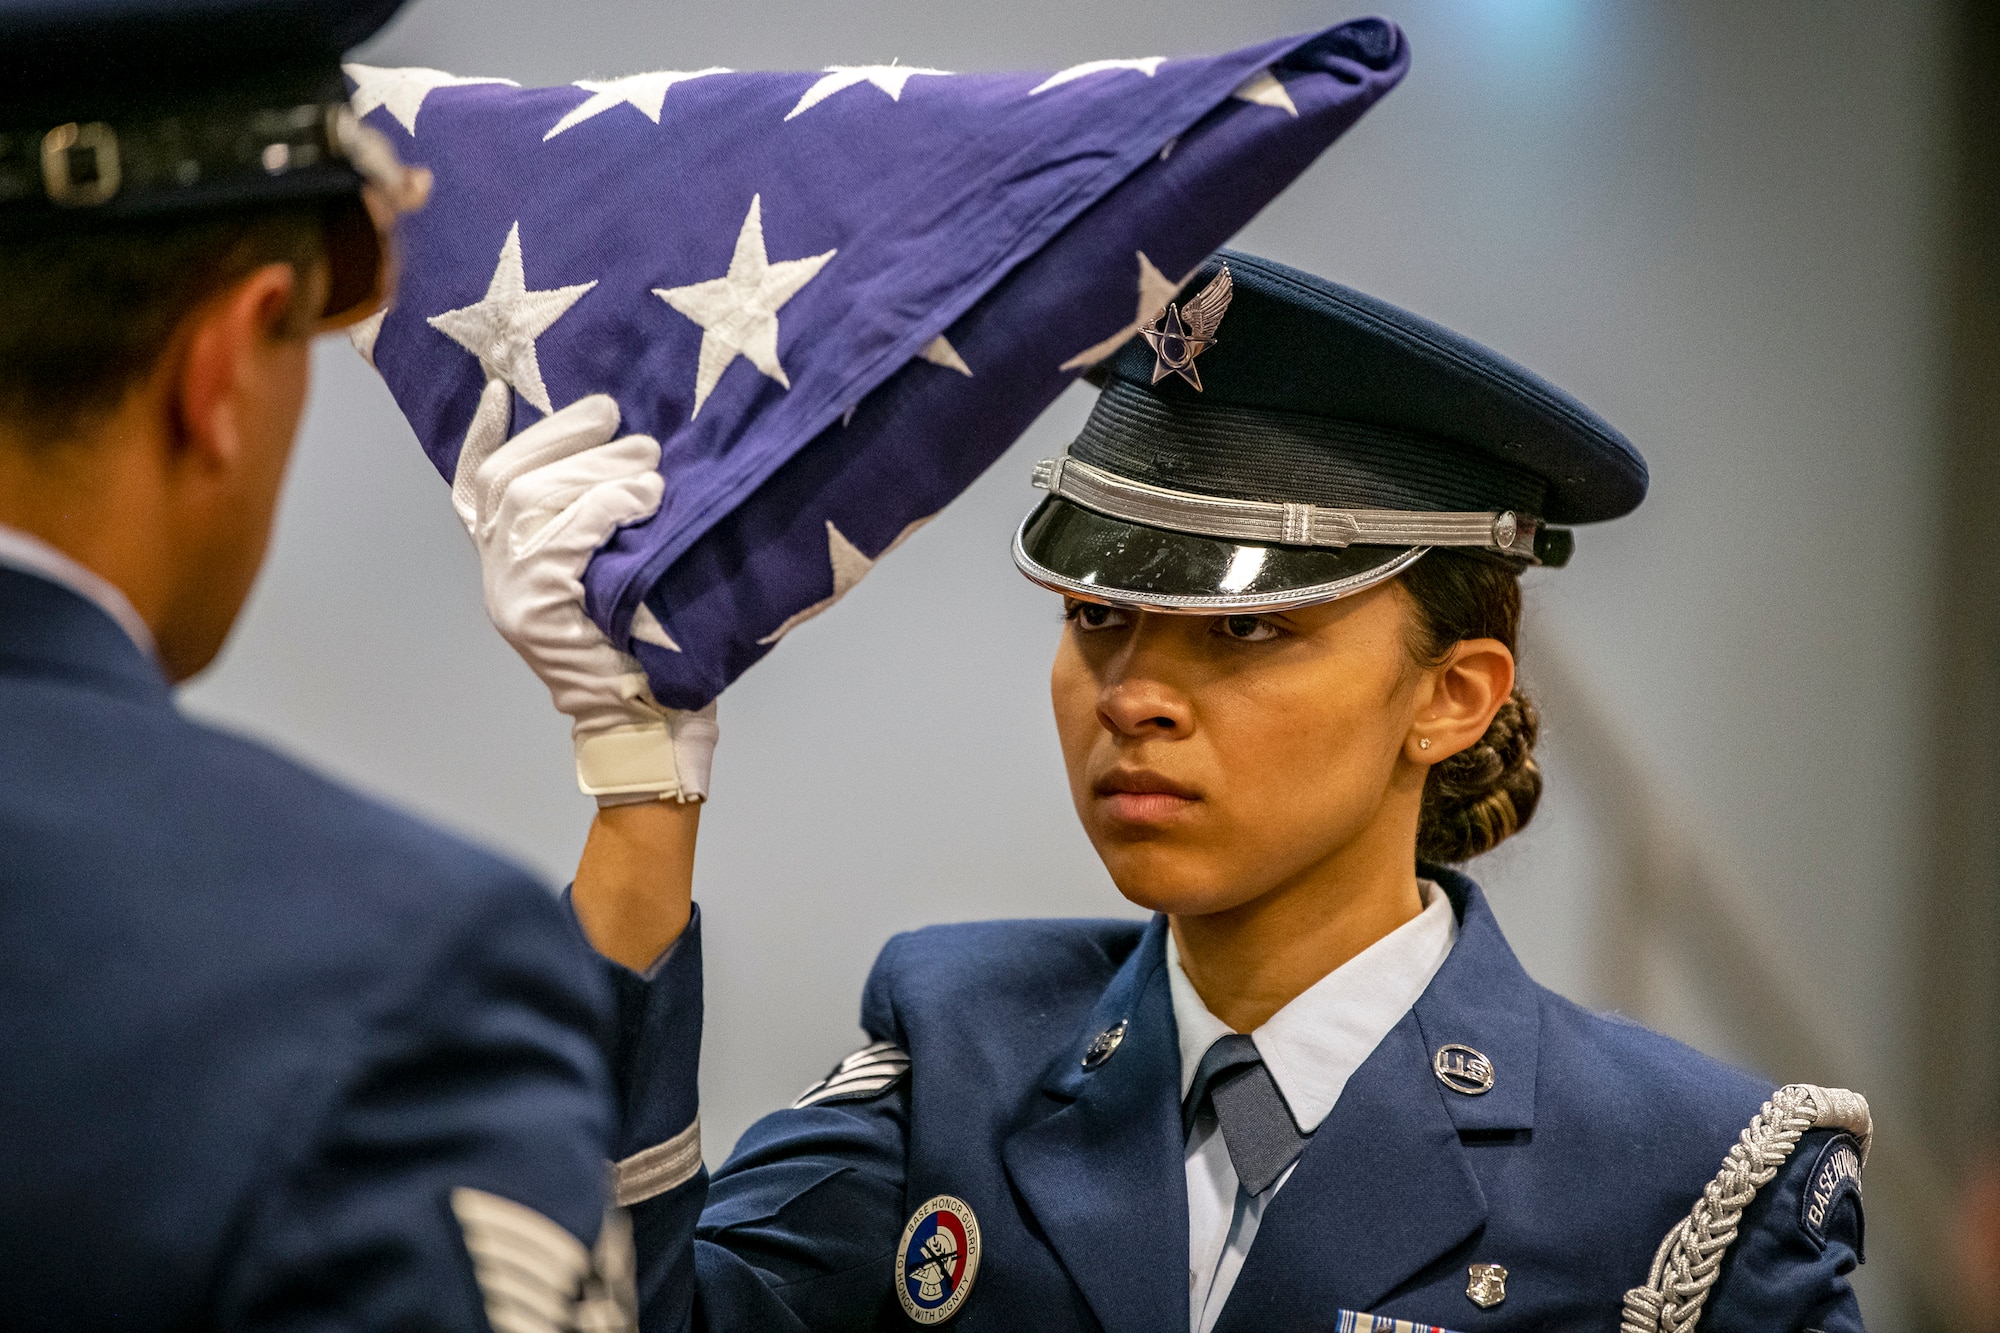 An Airman from the 422d Air Base Group honor guard, holds a folded flag during a 9/11 retreat ceremony at RAF Croughton, England, Sep. 9, 2022. Airmen and guests participated in the ceremony to honor those who lost their lives during the September 11th terrorist attacks. (U.S. Air Force photo by Staff Sgt. Eugene Oliver)